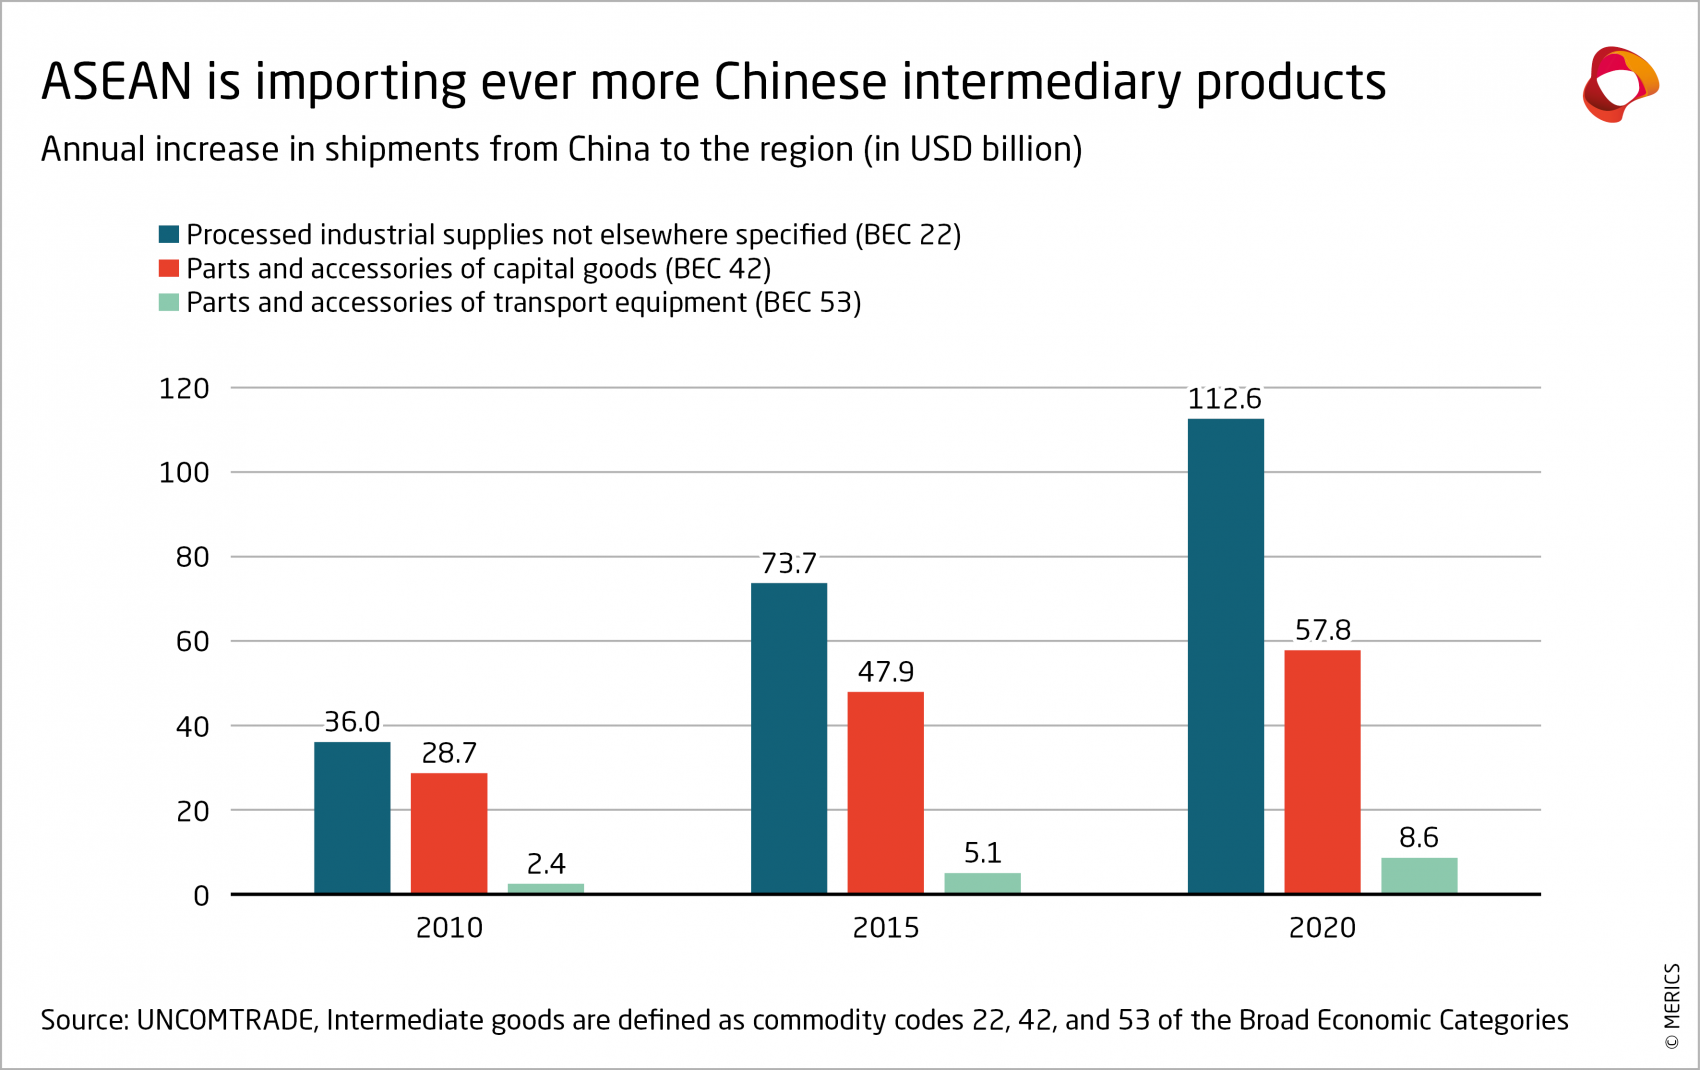 MERICS-Short-Analysis-ASEAN-is-importing-ever-more-Chinese-intermediary-products.png